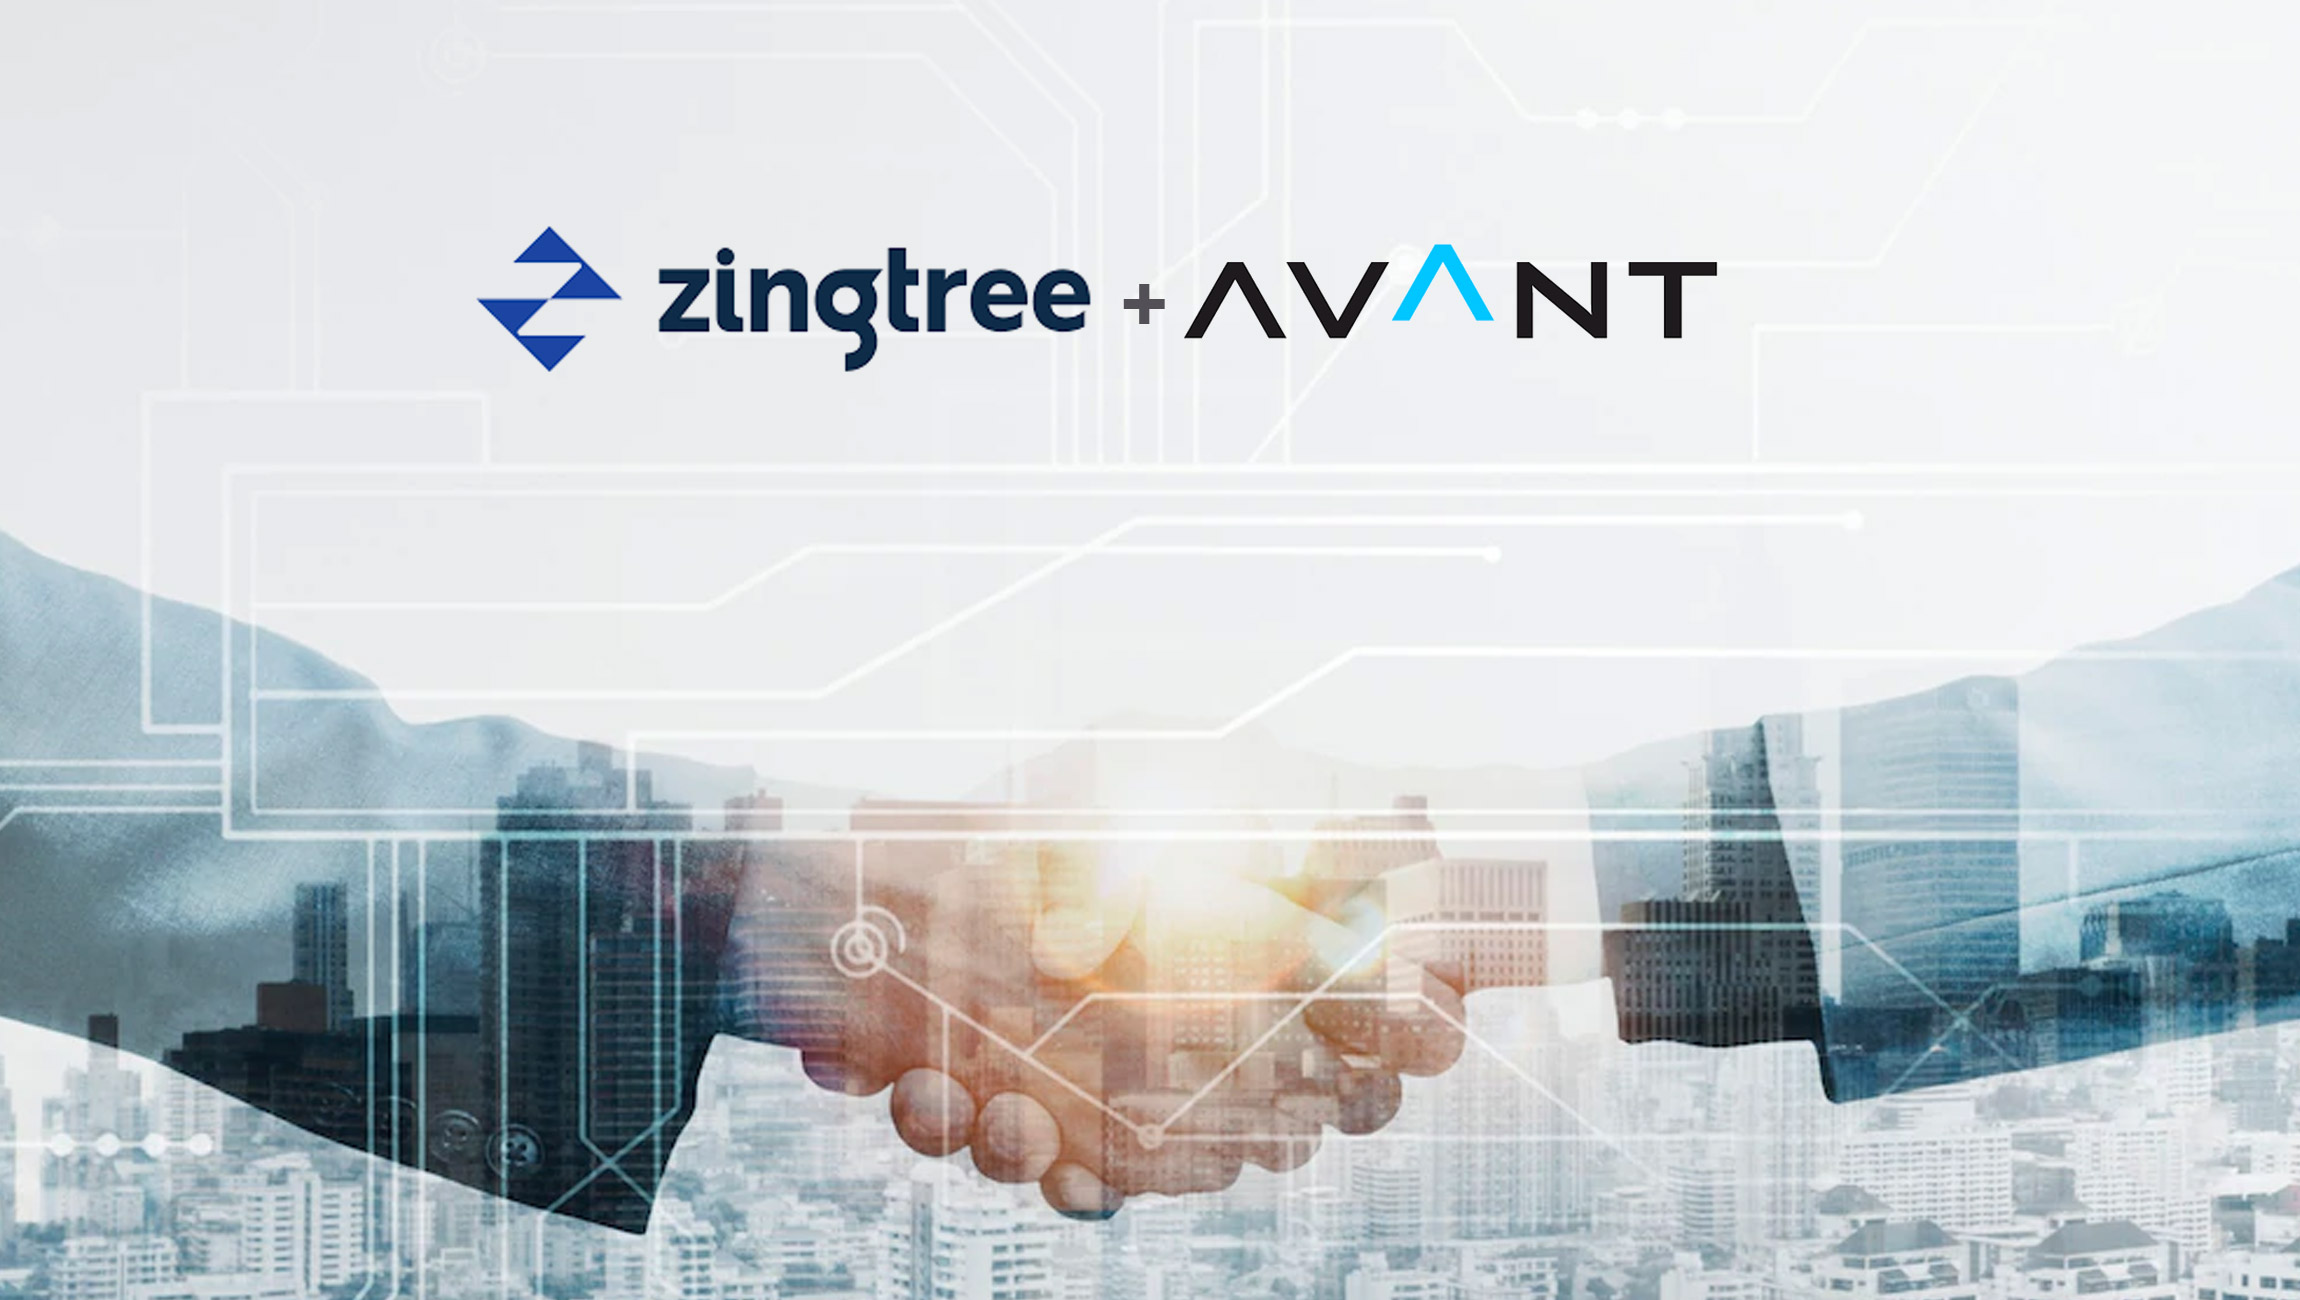 Zingtree Teams up with AVANT to Deliver Enhanced Contact Center Operations to its Global Partners